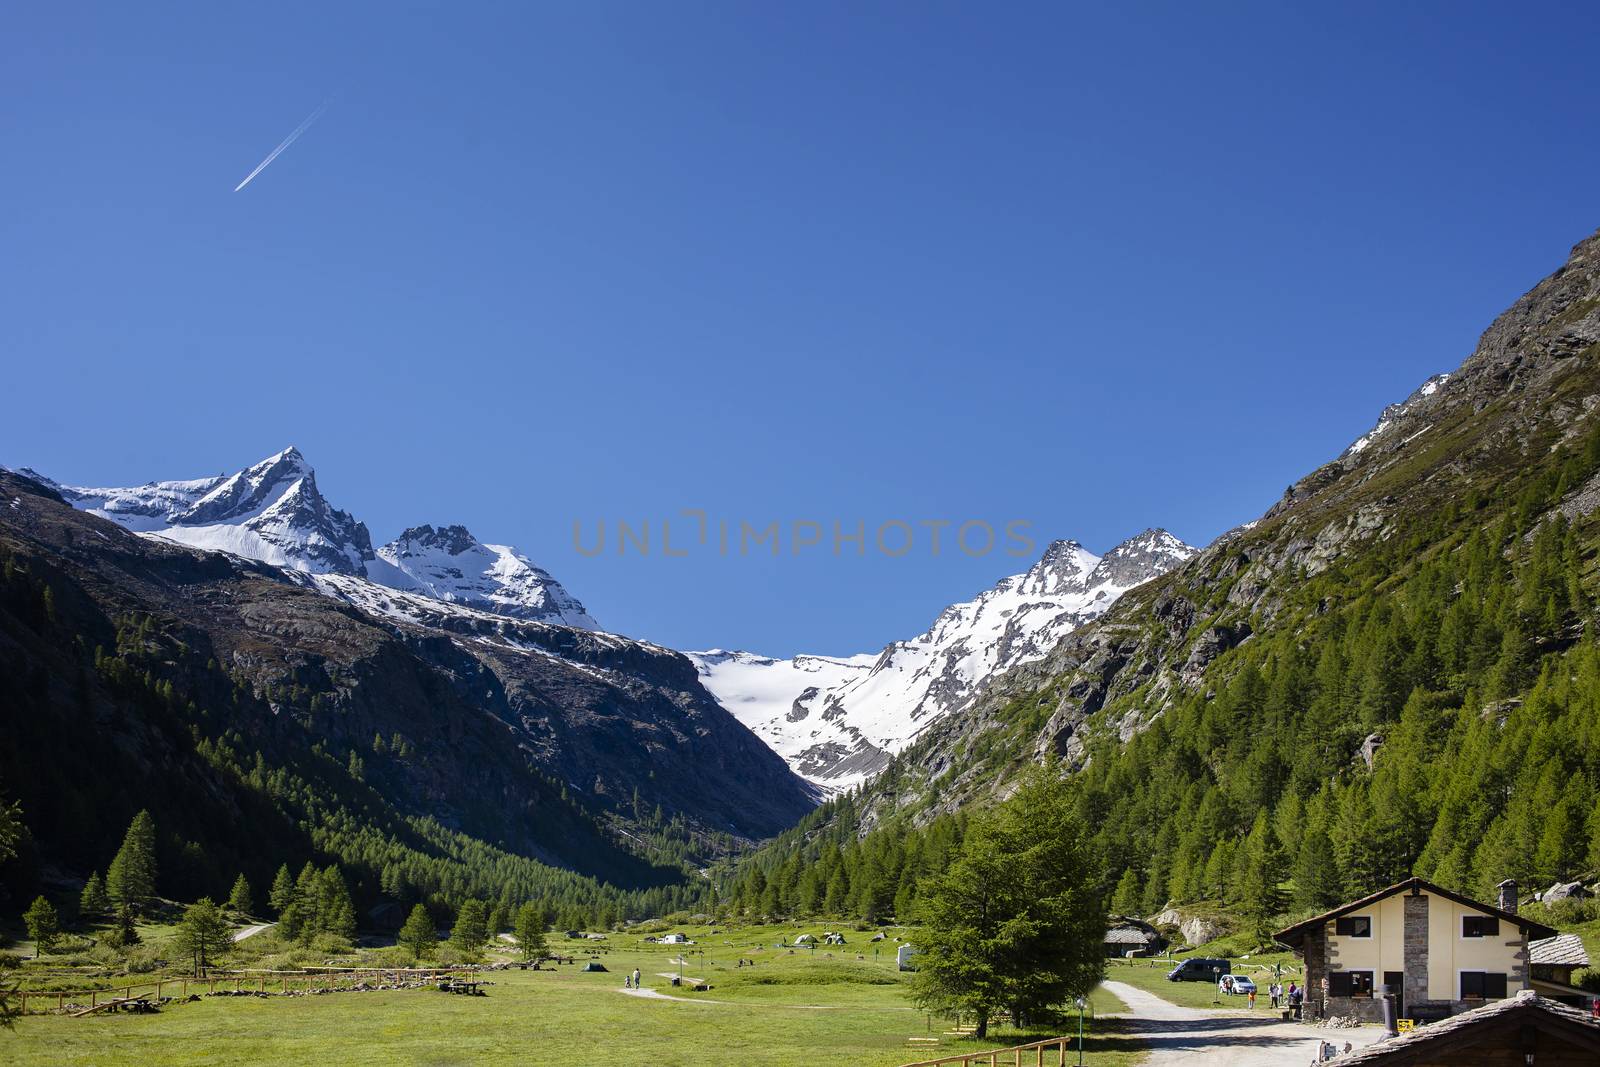 A beautiful camping between the peak of the mountains,Valsavaranche, Aosta, Italy